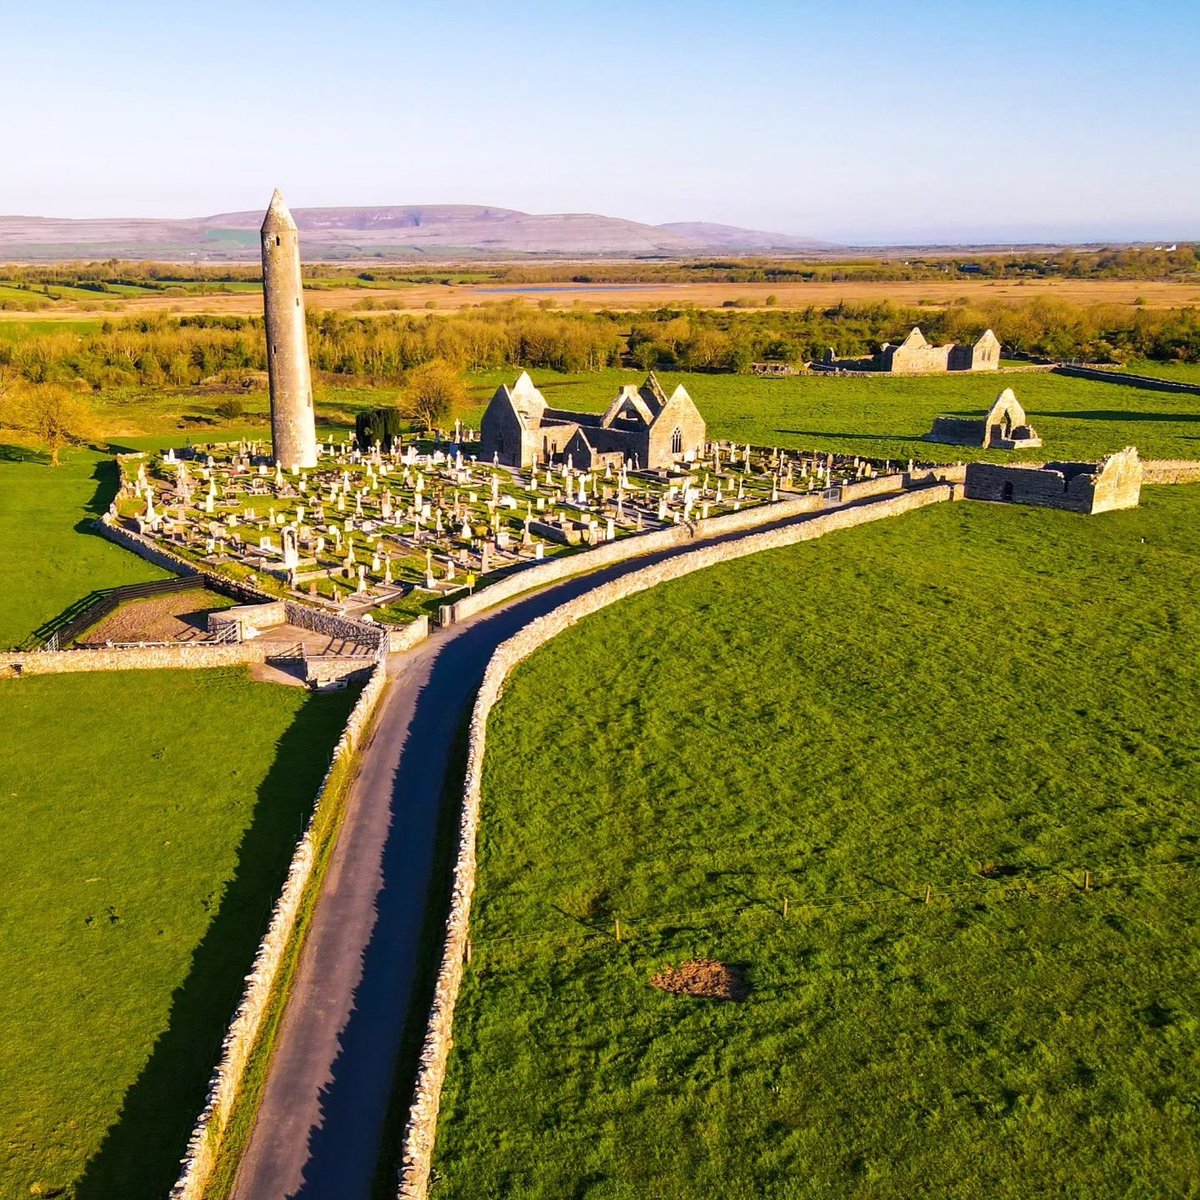 The beautiful monastic settlement of Kilmacduagh... Where its round tower, the tallest in Ireland, still stands after all these centuries! 💚 📸 IG/ skysthelimit_eire 📍 Kilmacduagh Monastery, Gort #KilmacduaghMonastery #Kilmacduagh #Gort #Galway #Ireland #VisitGalway